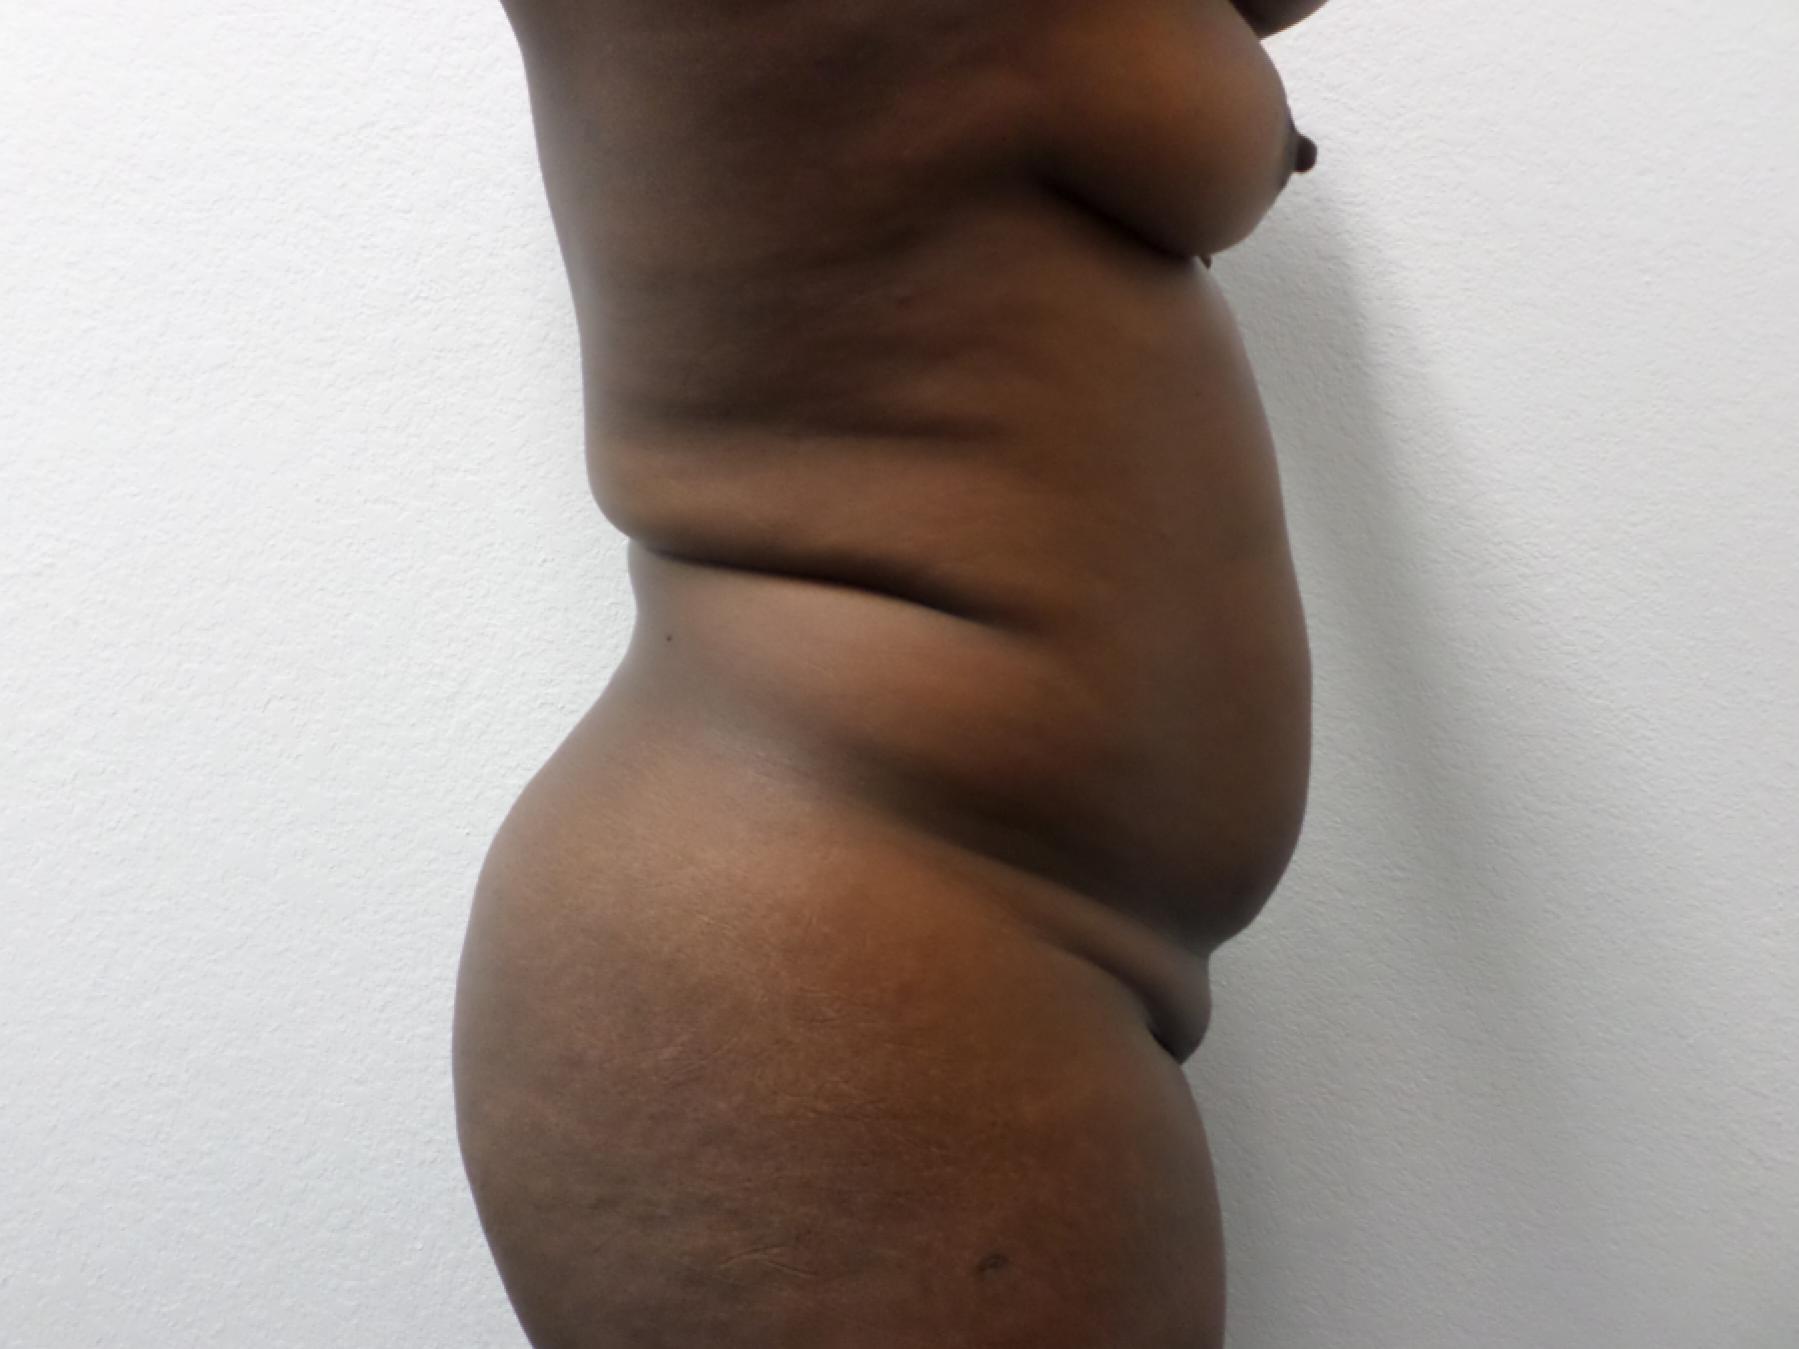 Liposuction: Patient 14 - Before and After 5